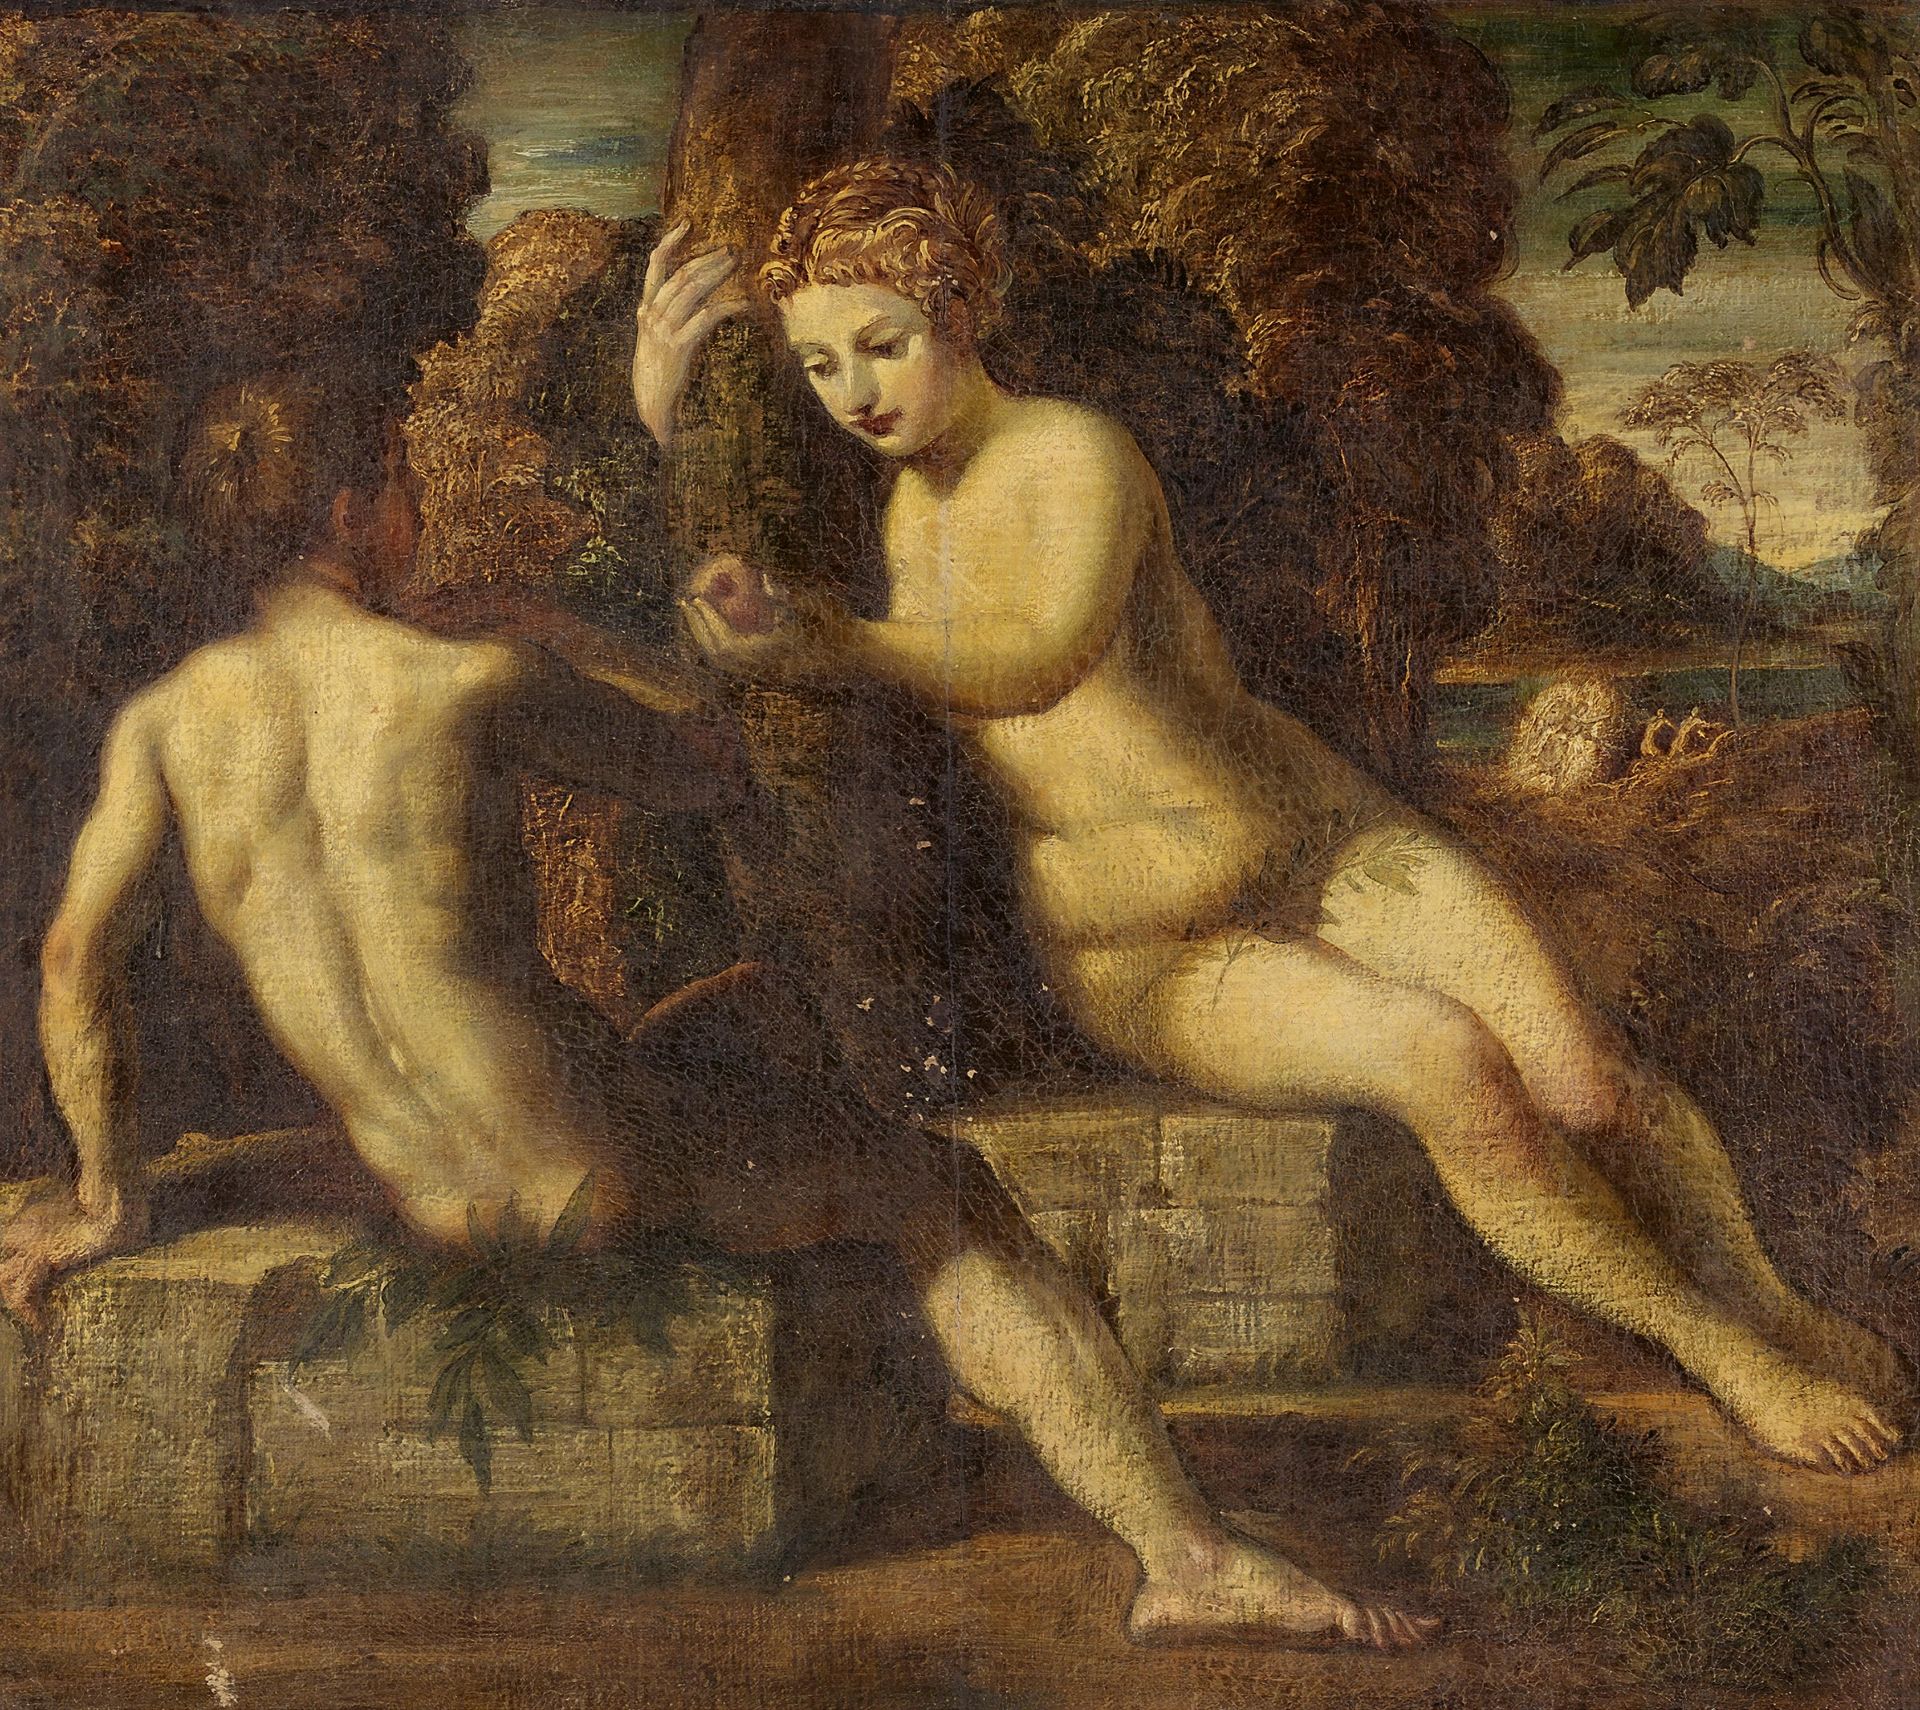 TINTORETTO, JACOPOVenice 1518 - 1594WorkshopTitle: The Fall of Man. Technique: Oil on canvas.